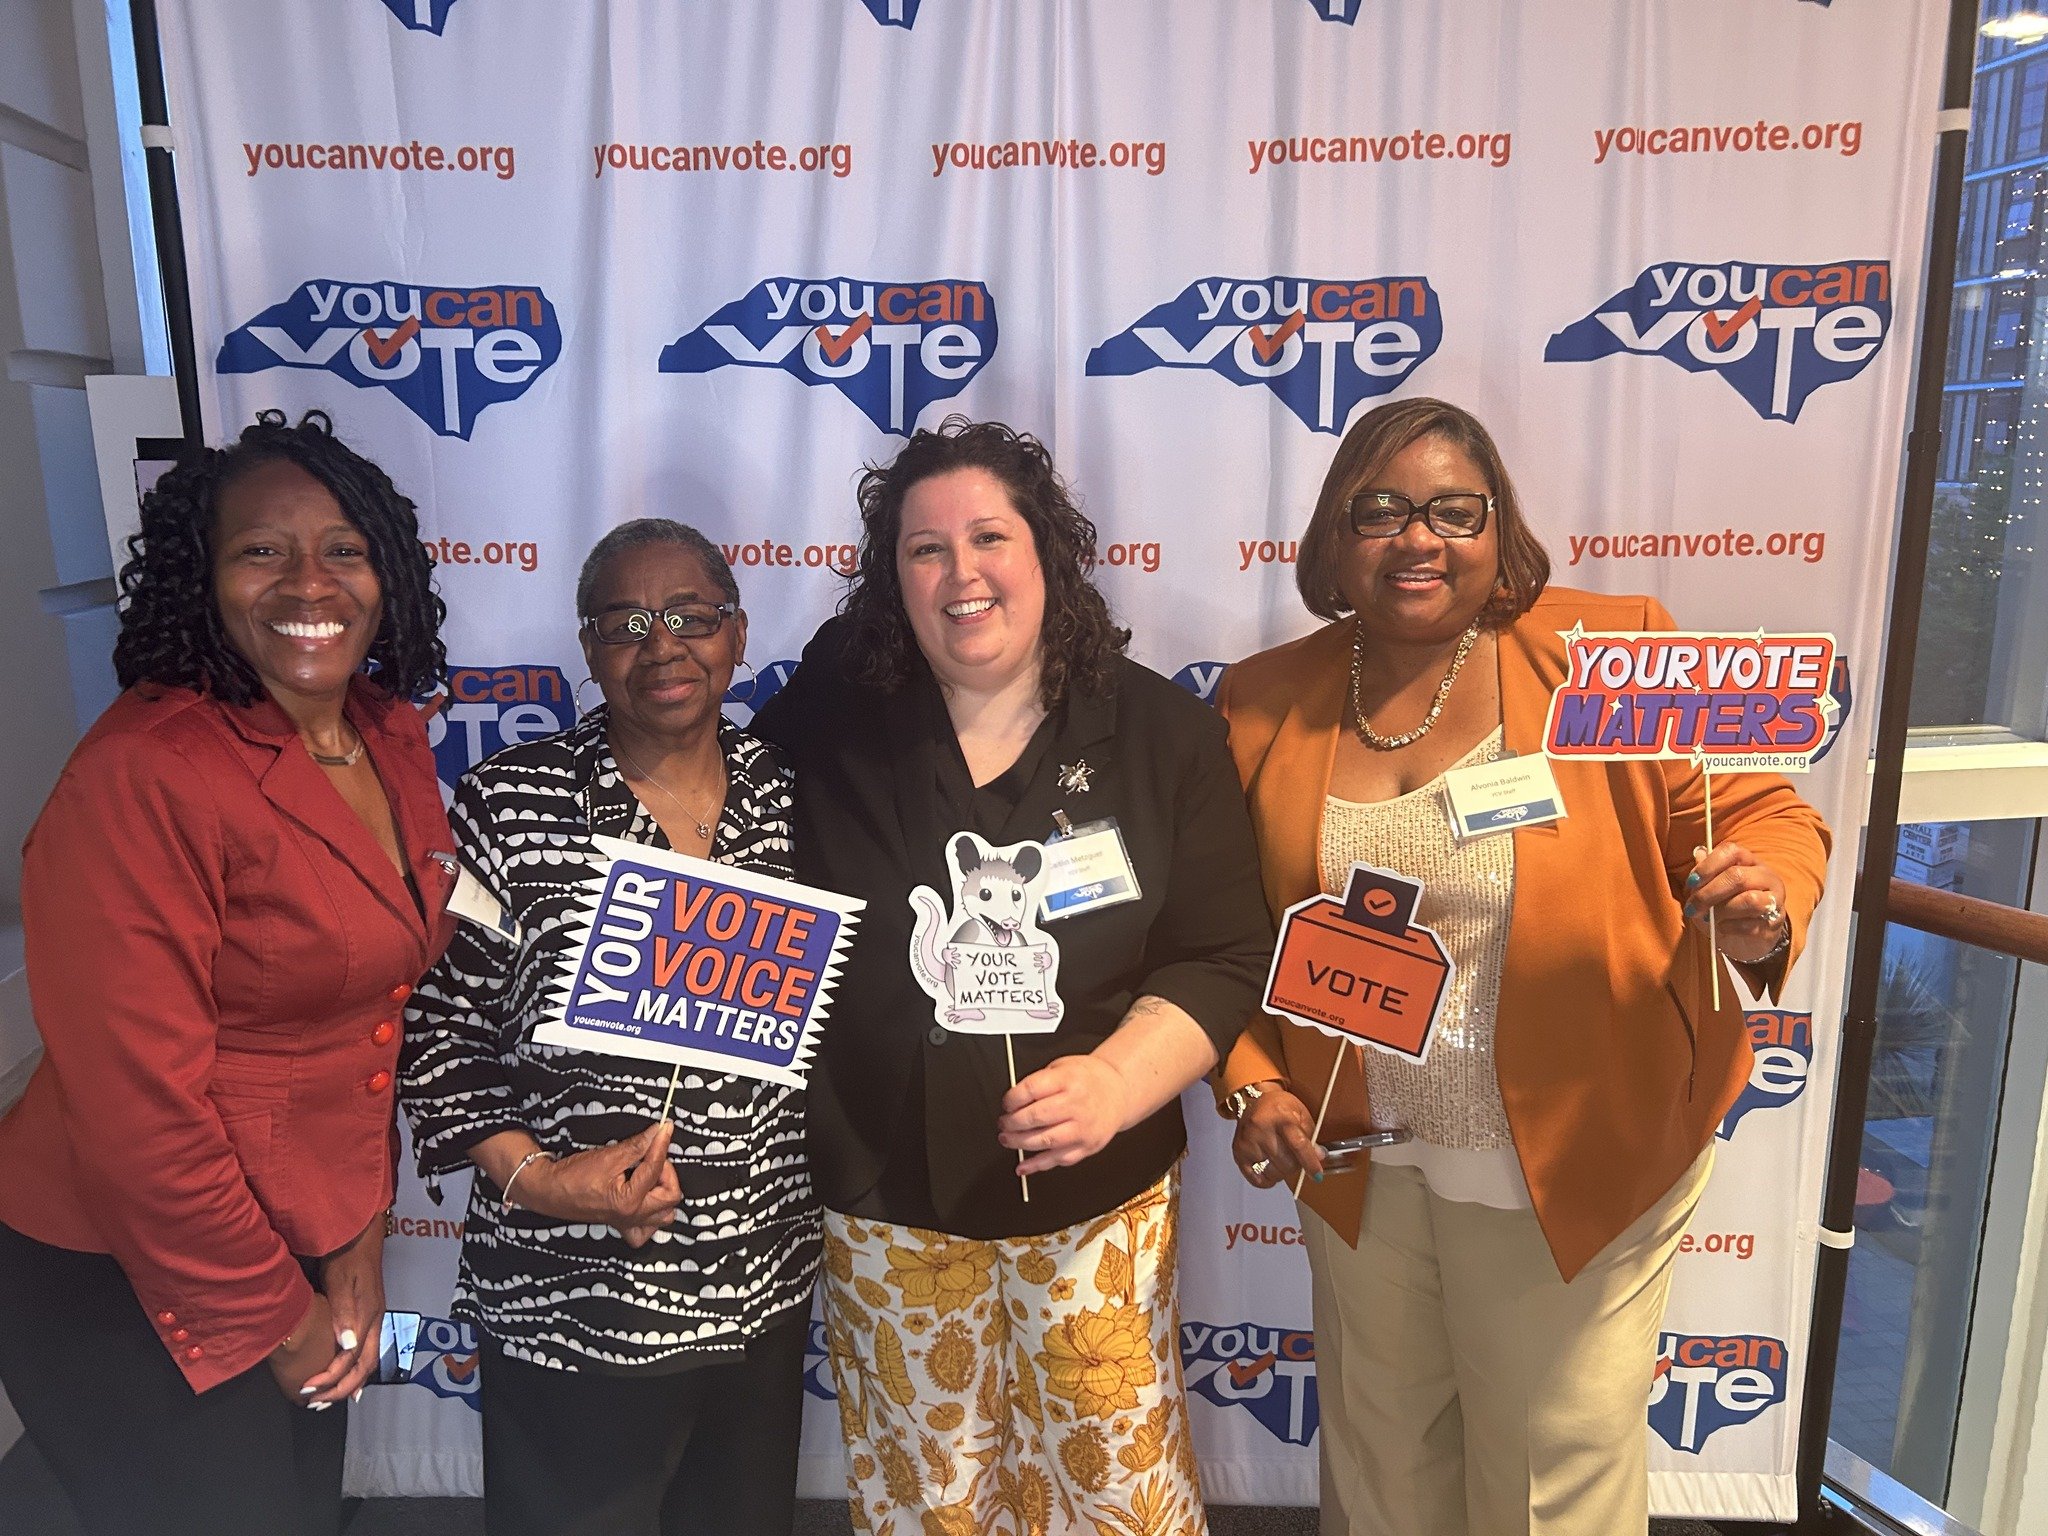 The party never ends! Here are more smiling pictures from our 10th Anniversary celebration at the Durham Arts Council. Join the best team in voting and help us register, educate, and empower voters to #VOTE2024! youcanvote.org/volunteer (link in bio)